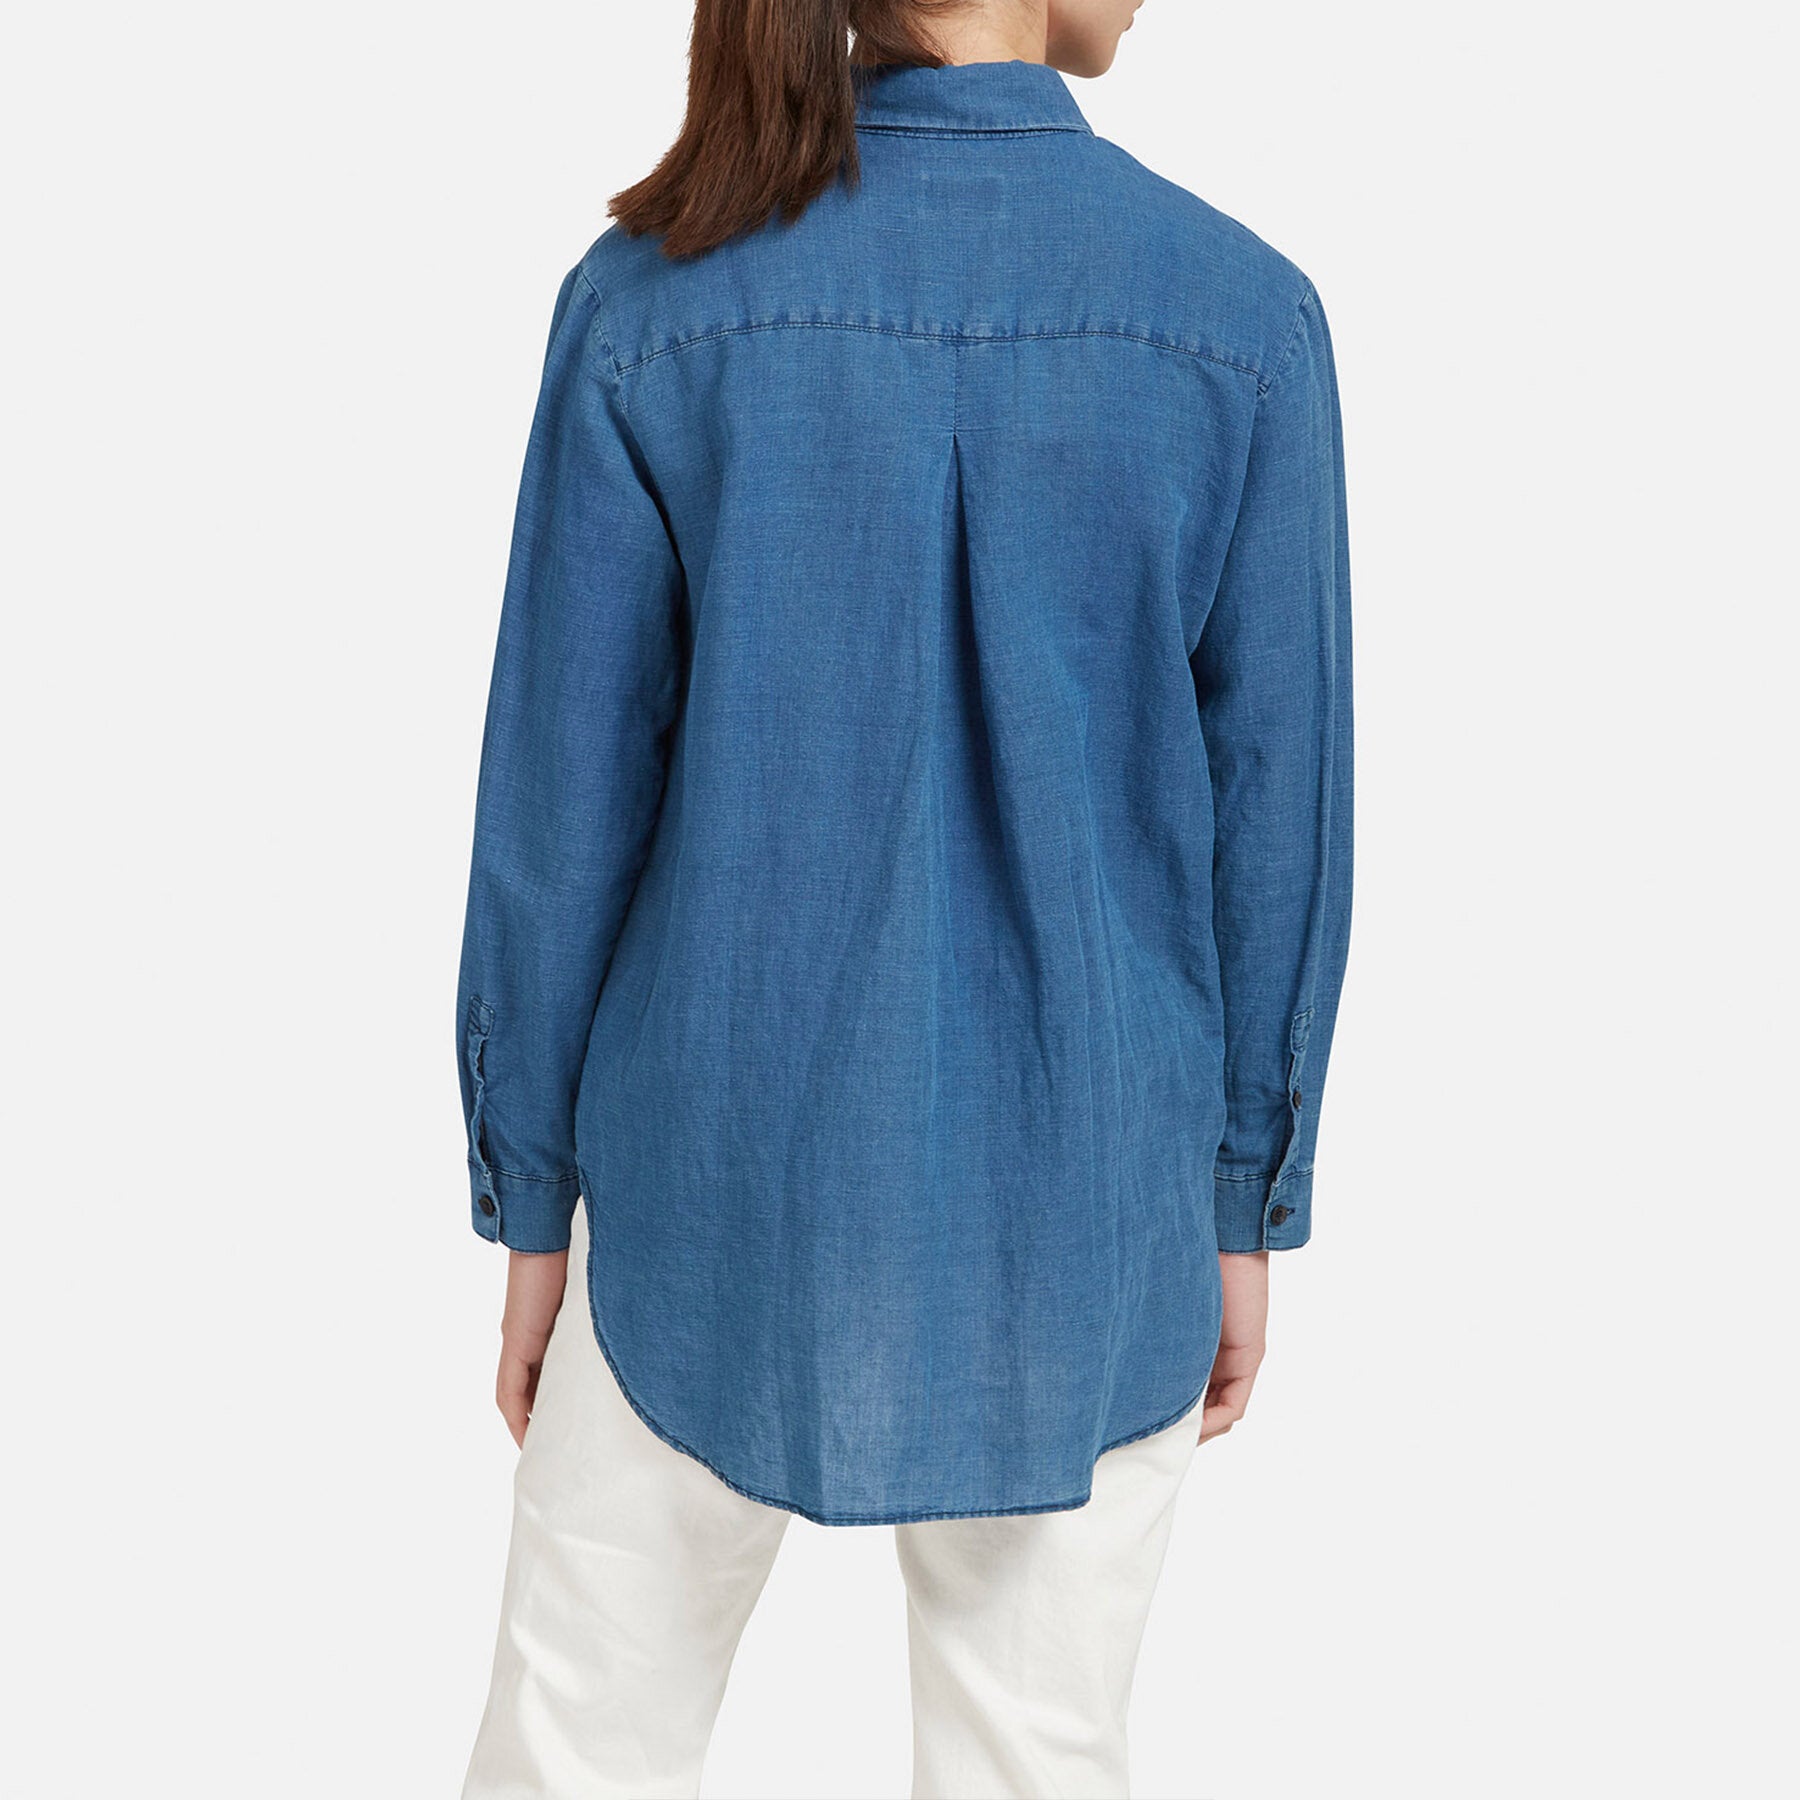 Concealed-button shirt